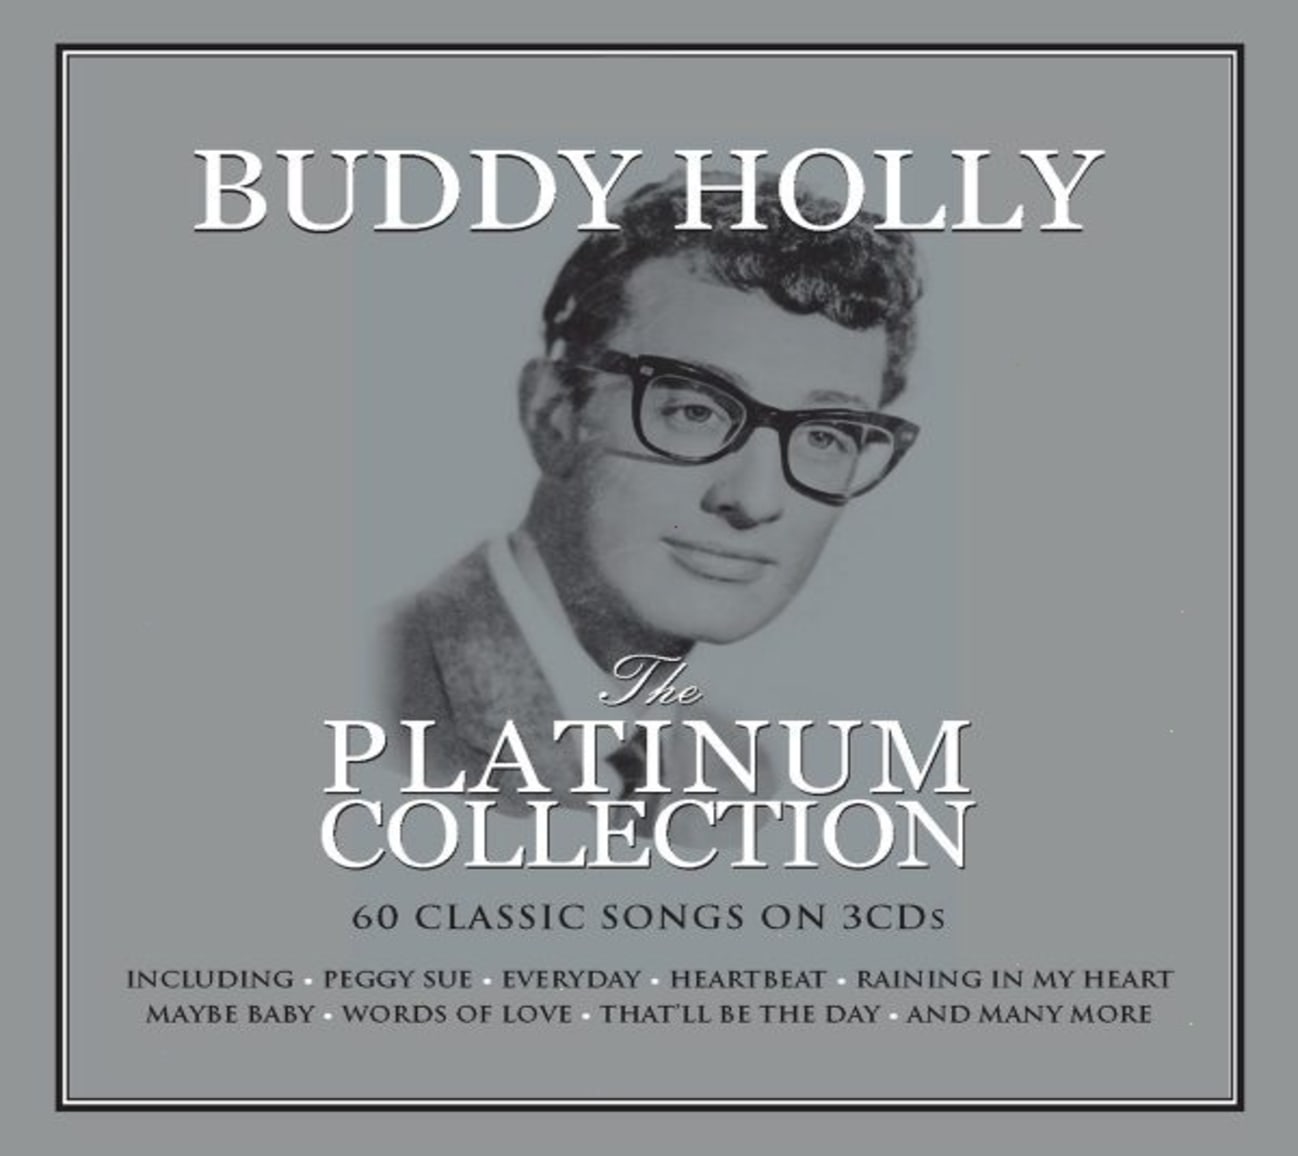 BUDDY HOLLY – The Platinum Collection (3CD SET) on MovieShack